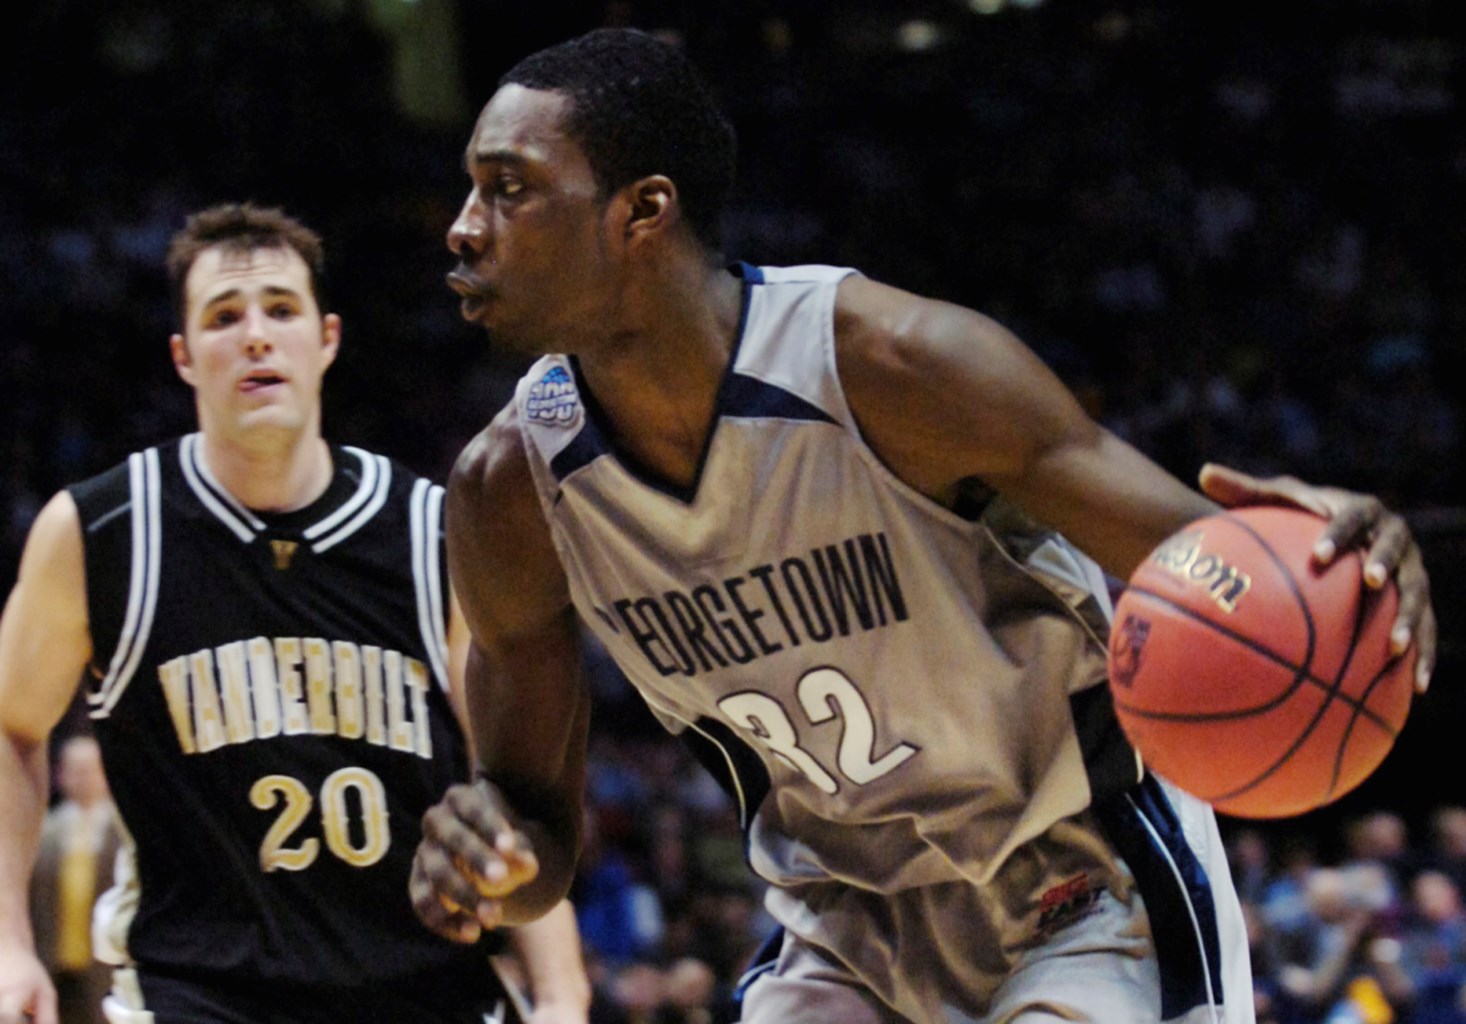 Jeff Green of the Georgetown Hoyas posts up during a college